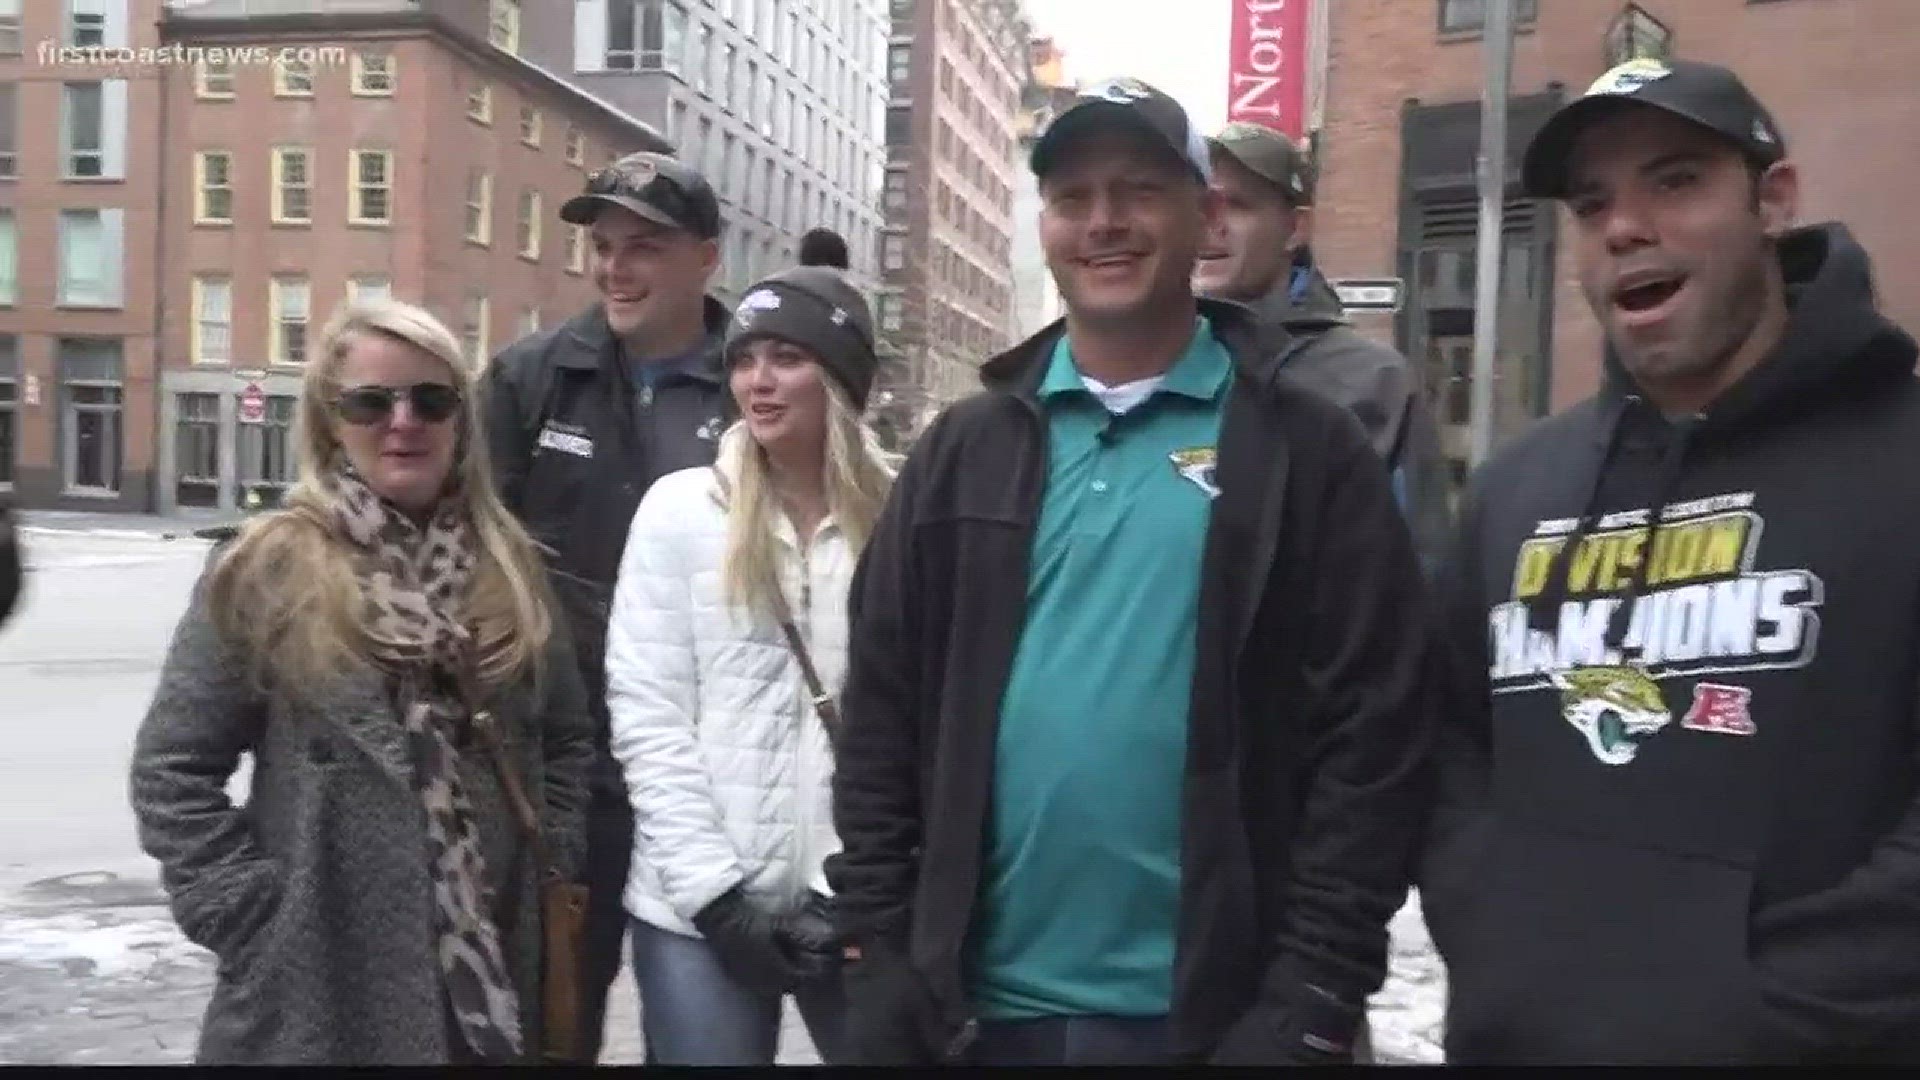 Boston, we've arrived! Fans are flooding the streets wearing Jags gear and teal.